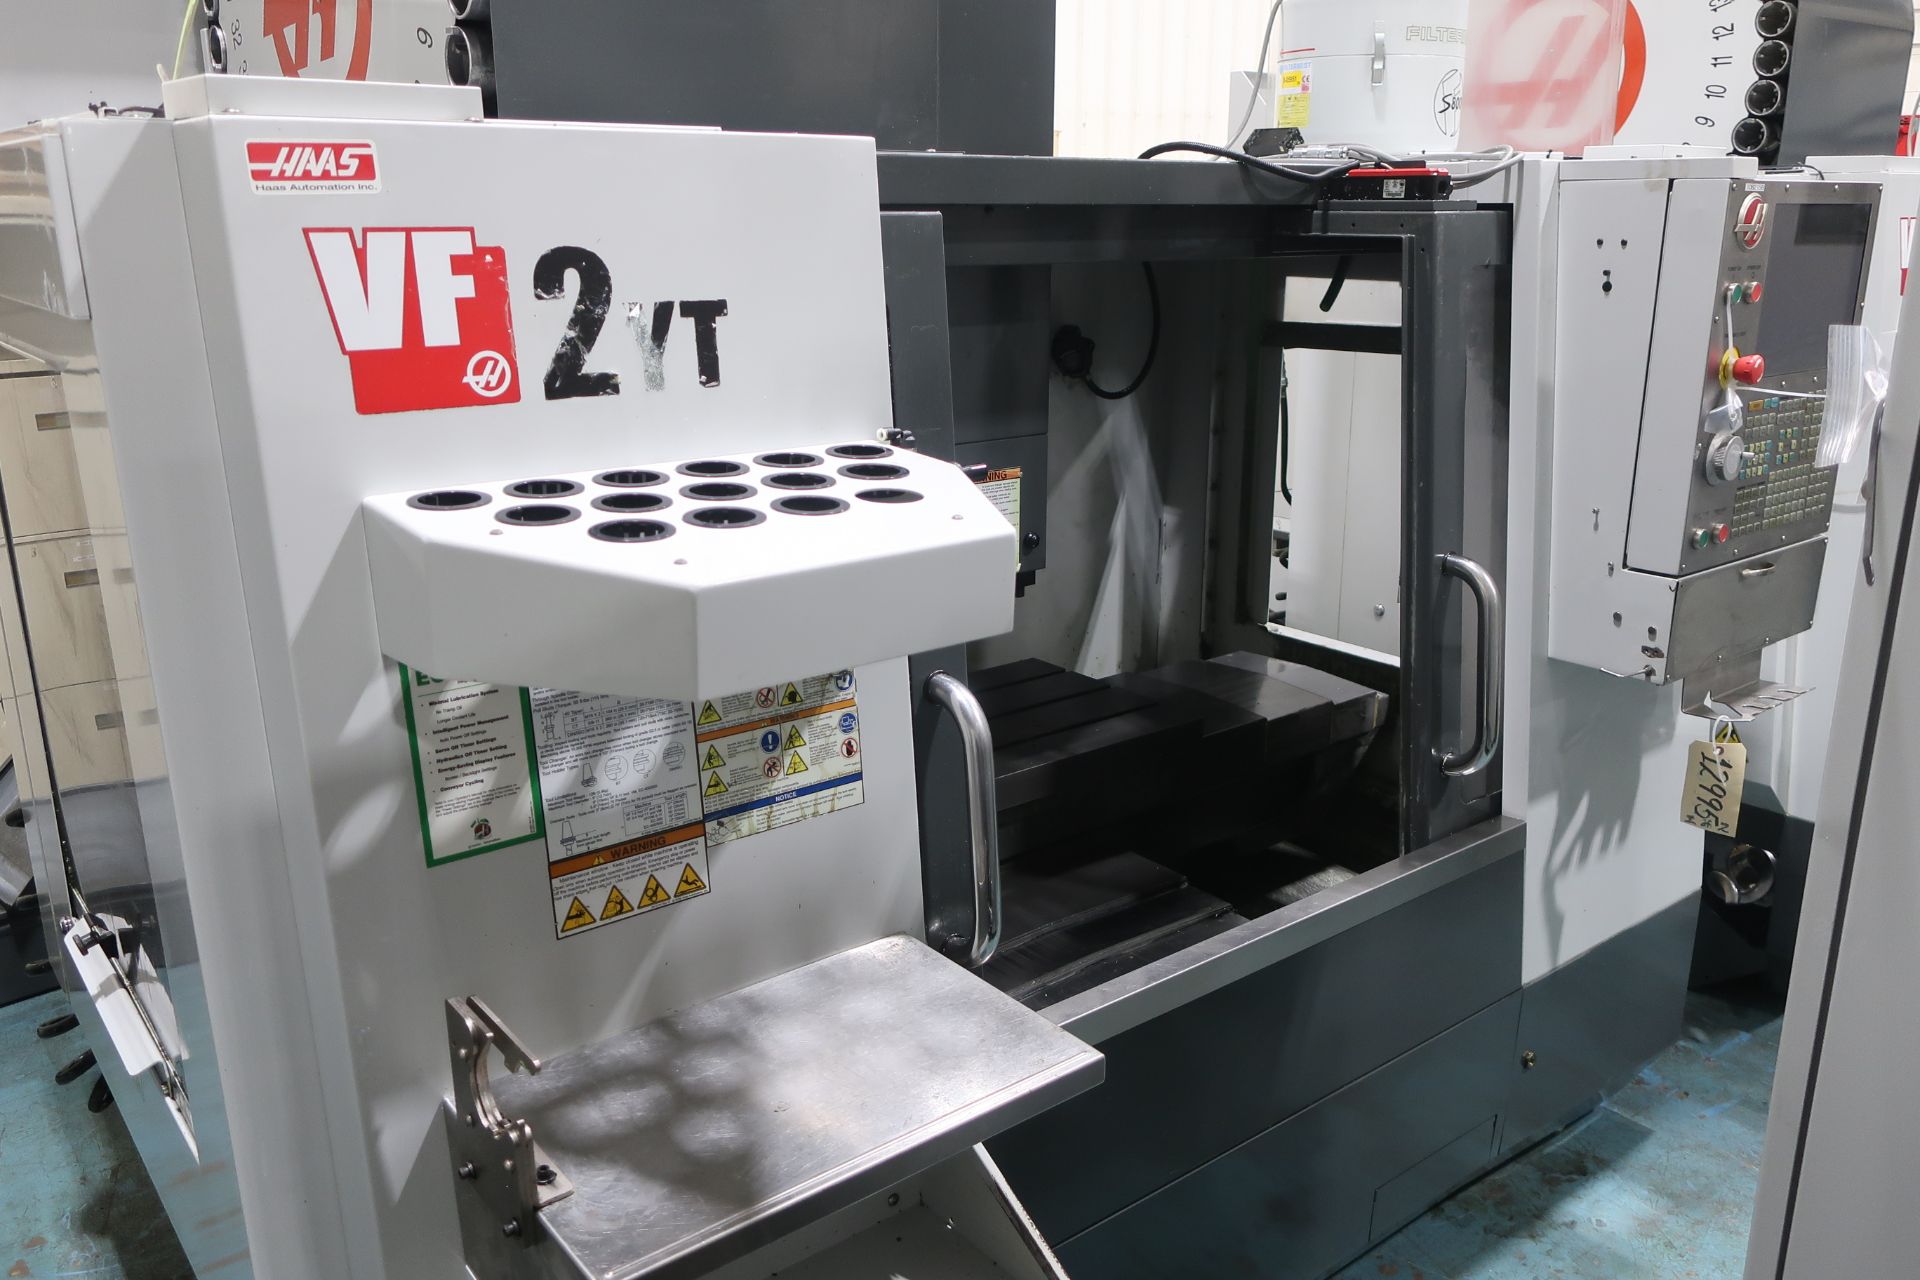 HAAS VF2-YT CNC 3-AXIS VERTICAL MACHINING CENTER, 15K RPM SPINDLE, S/N 1082158, NEW 2010 - Image 5 of 9